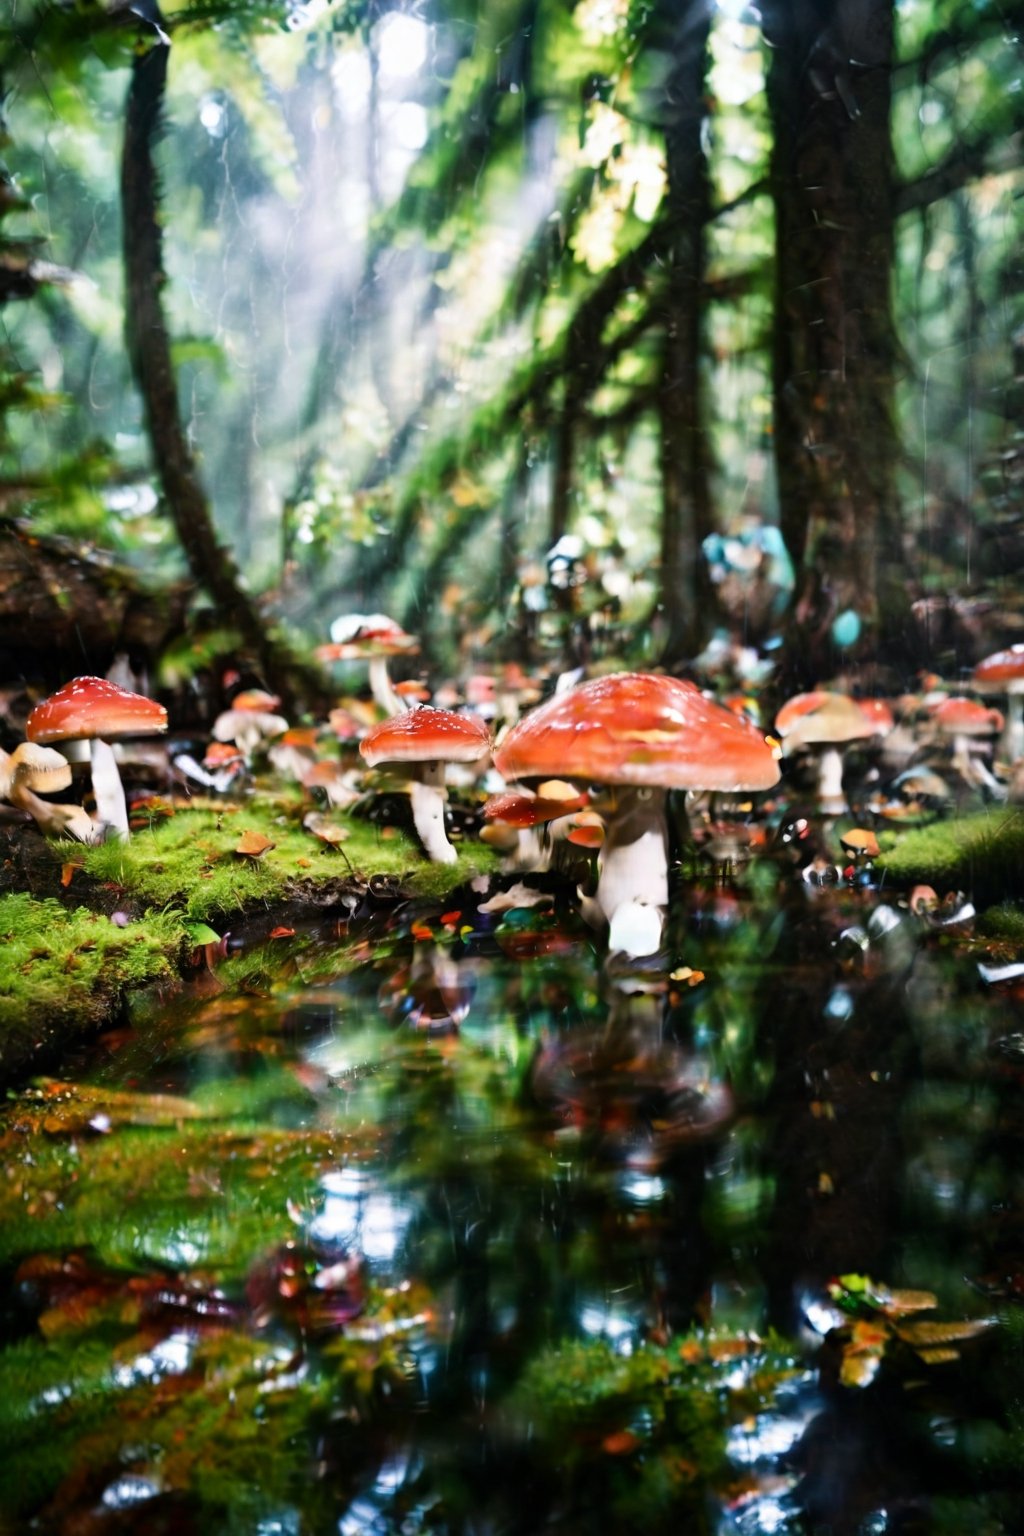 nature background, landscape, distortion, blur, meme, dreamcore, desaturation , brightness, chromatic distortion,analog photography, camera lens distortion, fantastic, daydream, liminal spaces, dreams, realistic nature, analog record, rain forest, cursed, mushroom effect, lysergic